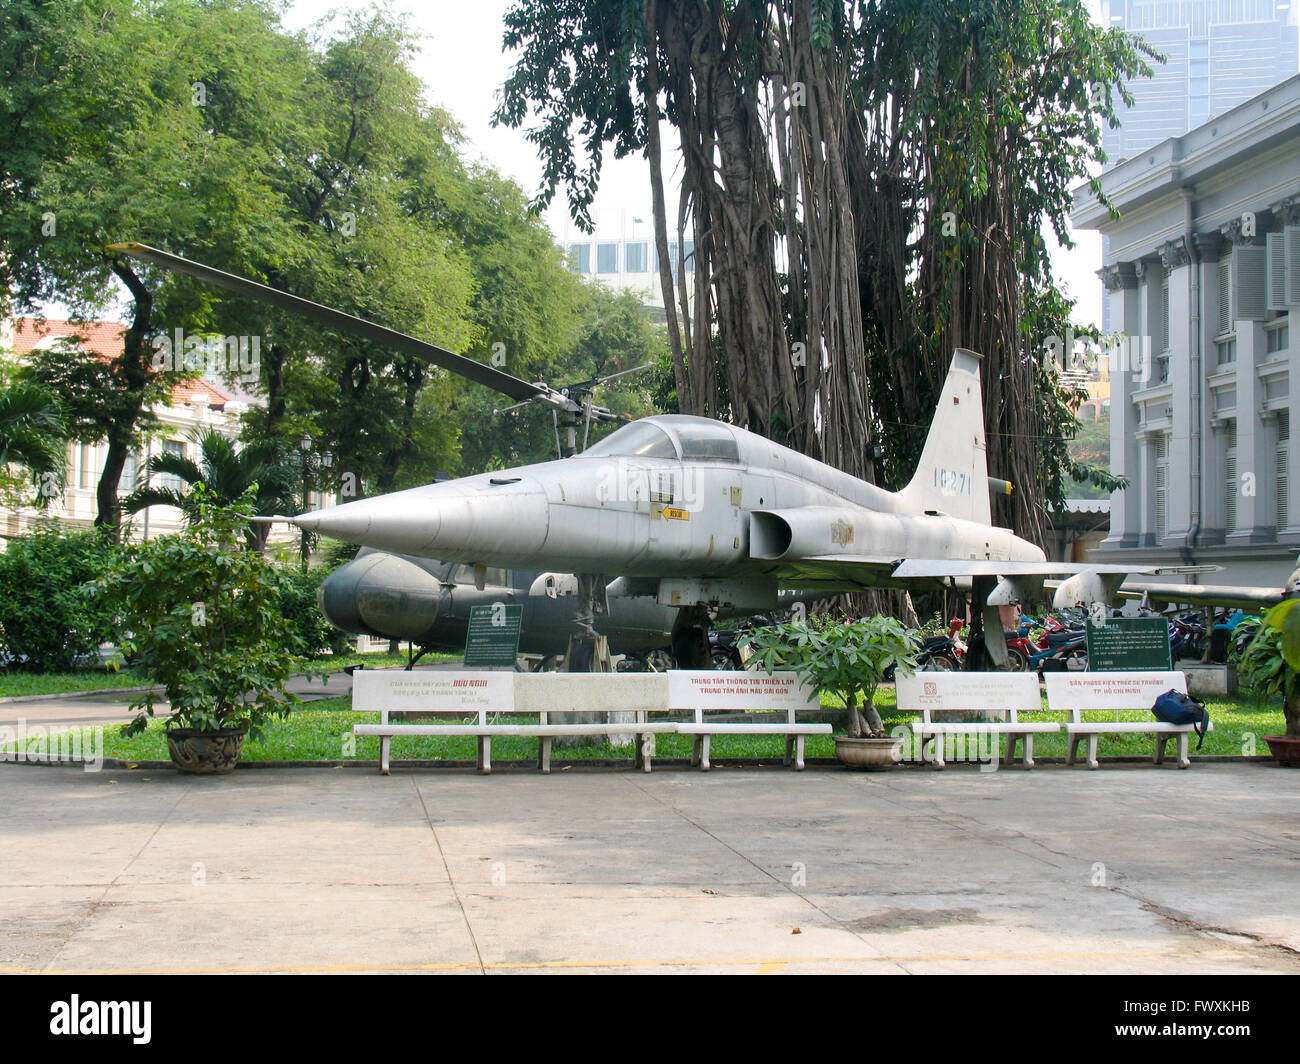 A US fighter jet and helicopter on display in Ho Chi Minh City promoting the musical Miss Saigon. Stock Photo